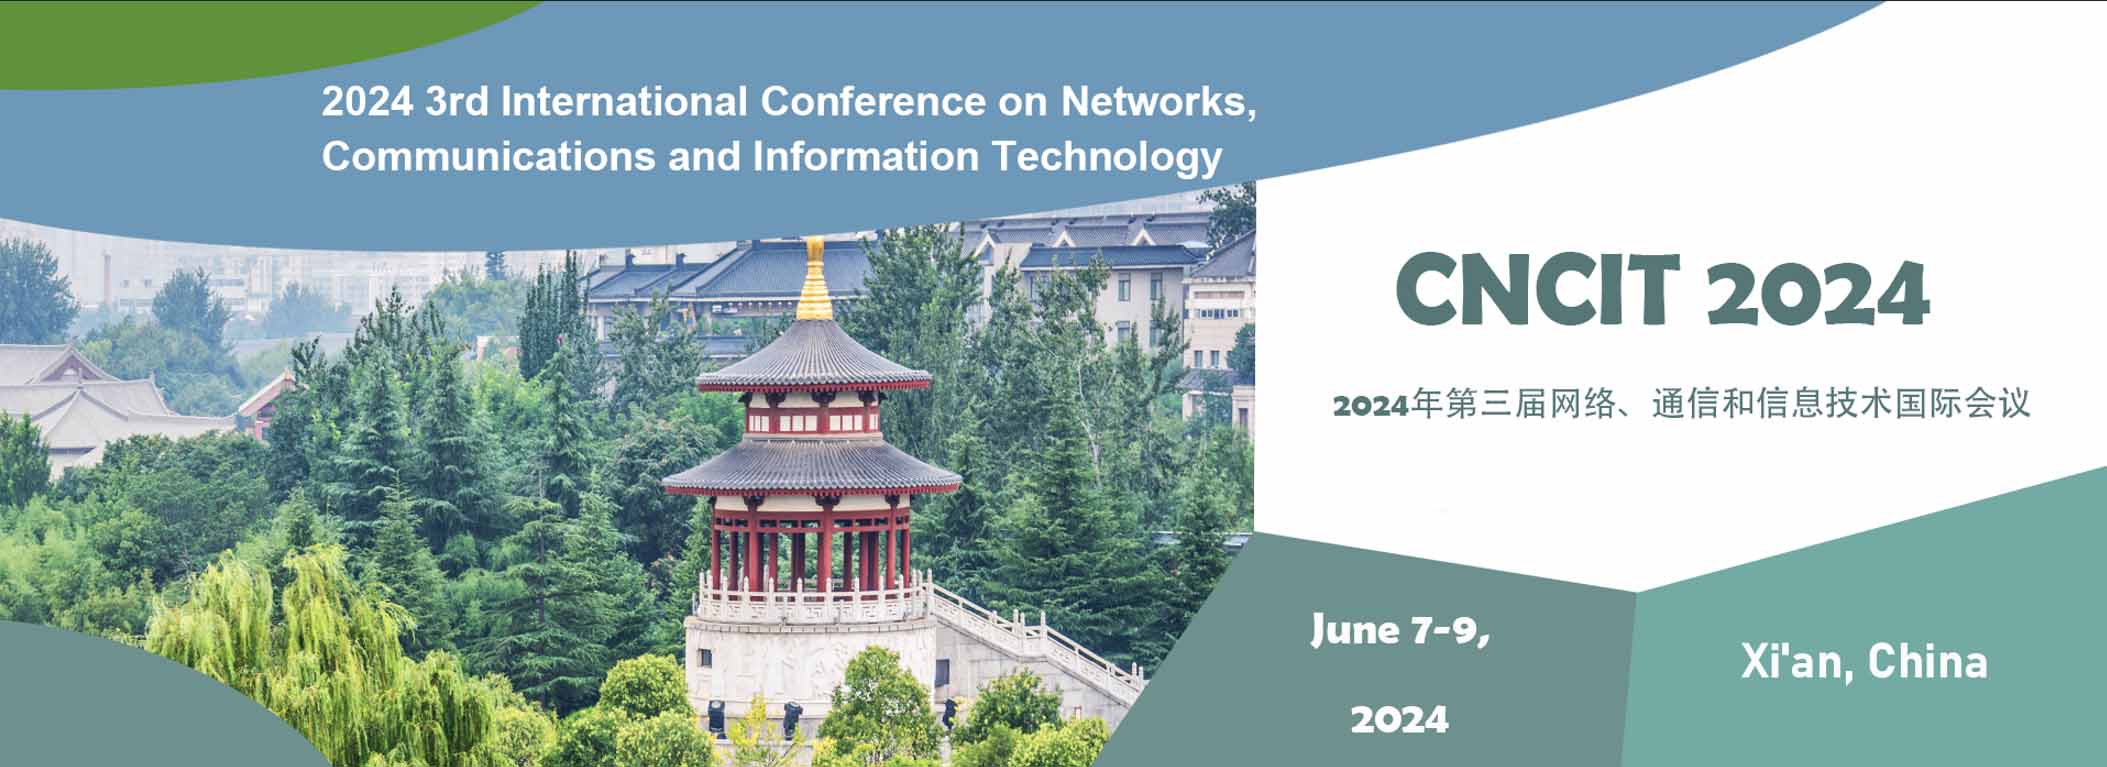 2024 3rd International Conference on Networks, Communications and Information Technology (CNCIT 2024), Xi'an, Shanxi, China